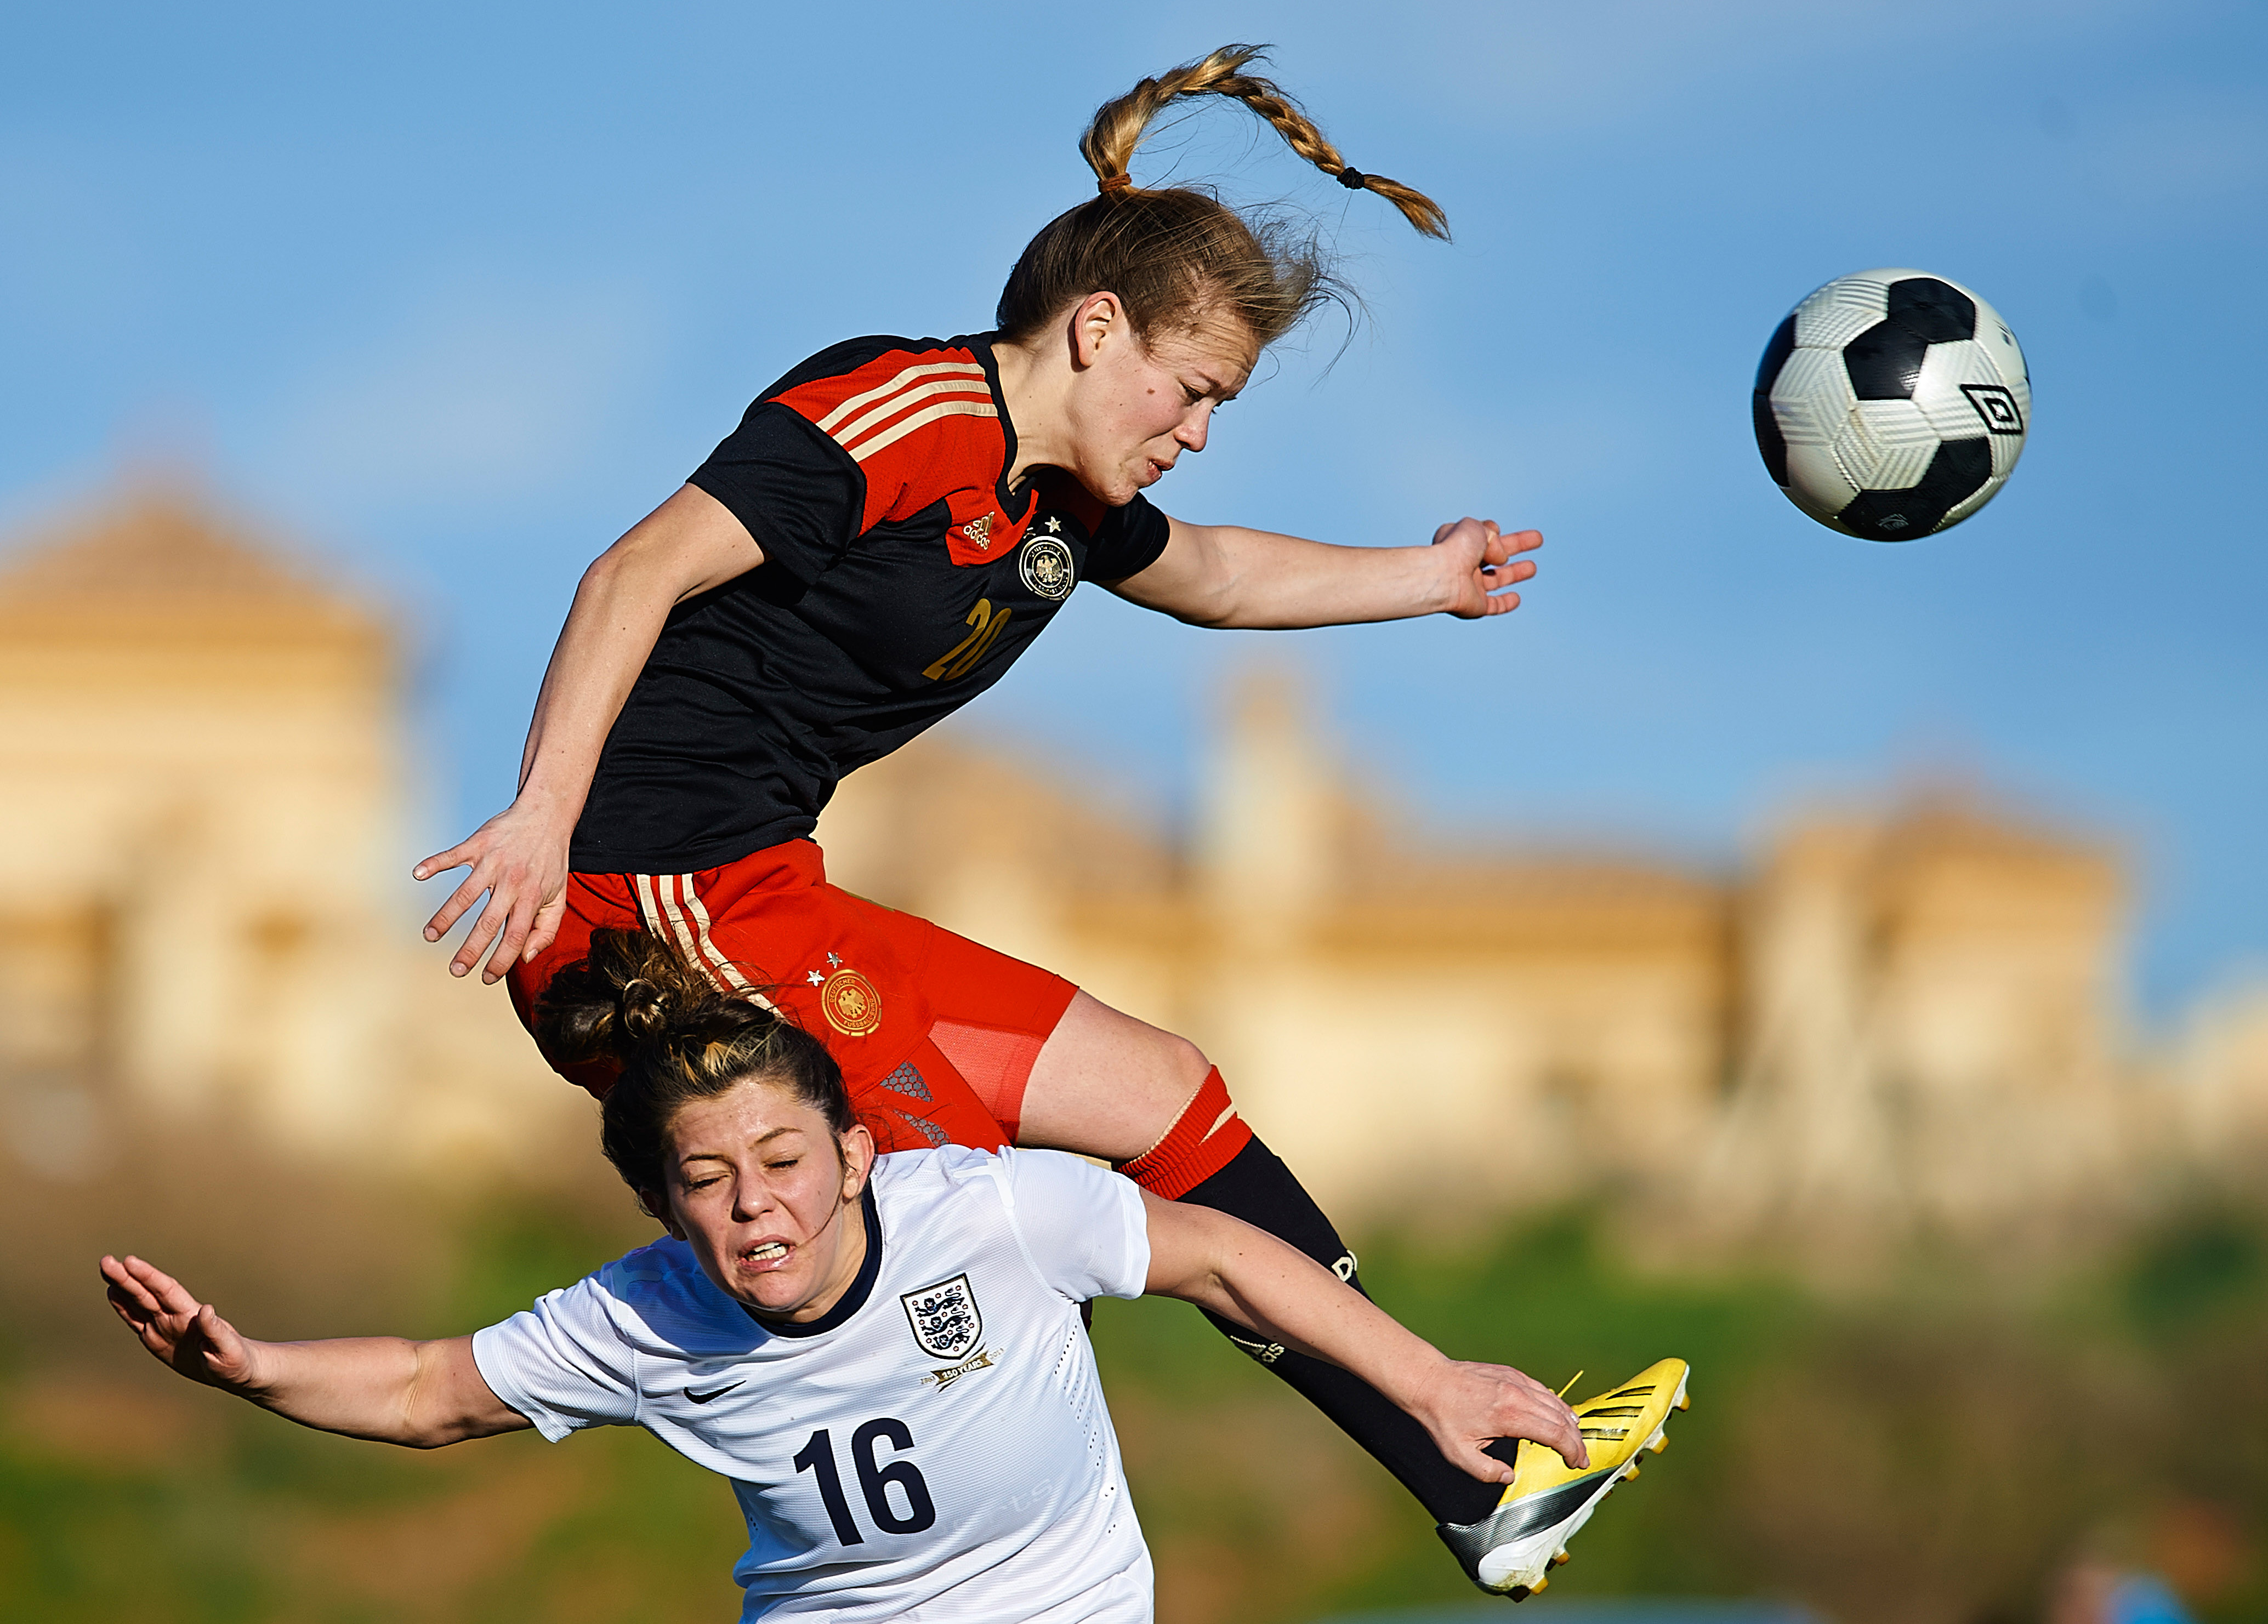 LA MANGA, SPAIN - MARCH 03:Blanca Bragg (L) of England competes for the ball with Margarita Gidion of Germany during the U-23 friendly match between England and Germany at la Manga Club on Ma